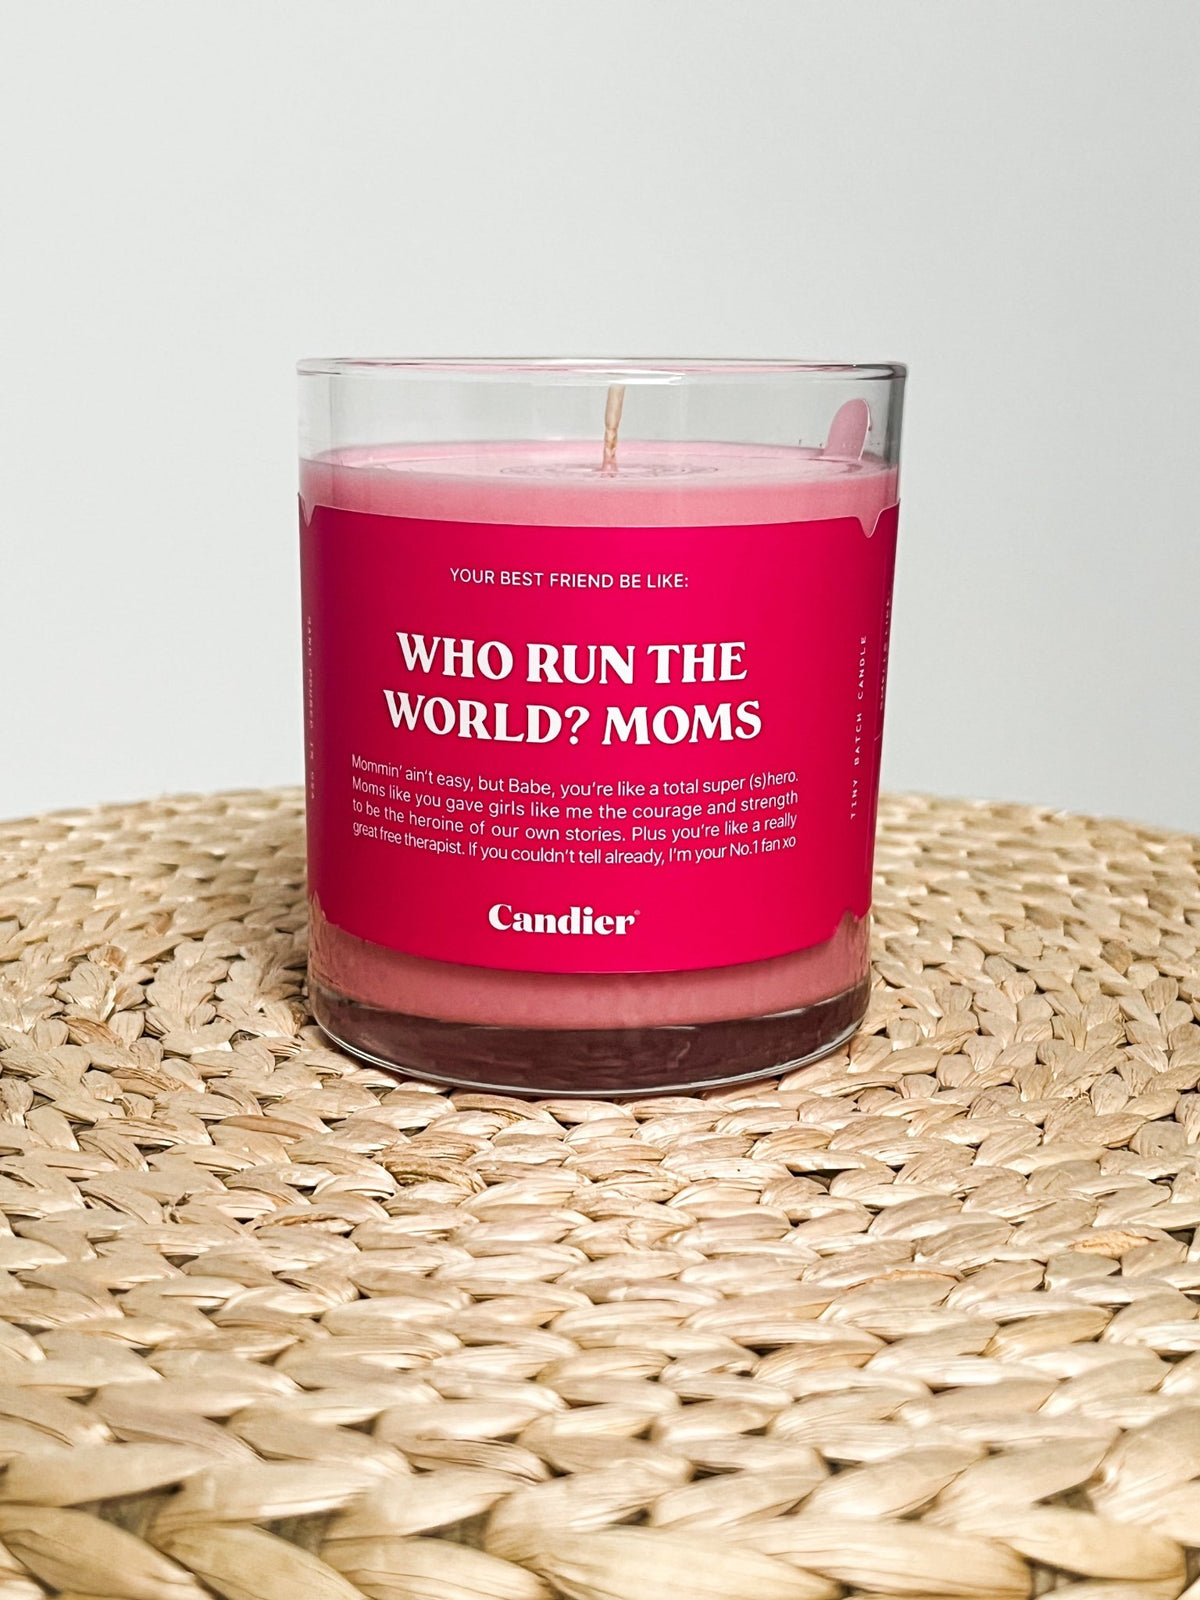 Who runs the world Moms candle 9 oz - Stylish candle - Trendy Gifts for Mom at Lush Fashion Lounge in Oklahoma